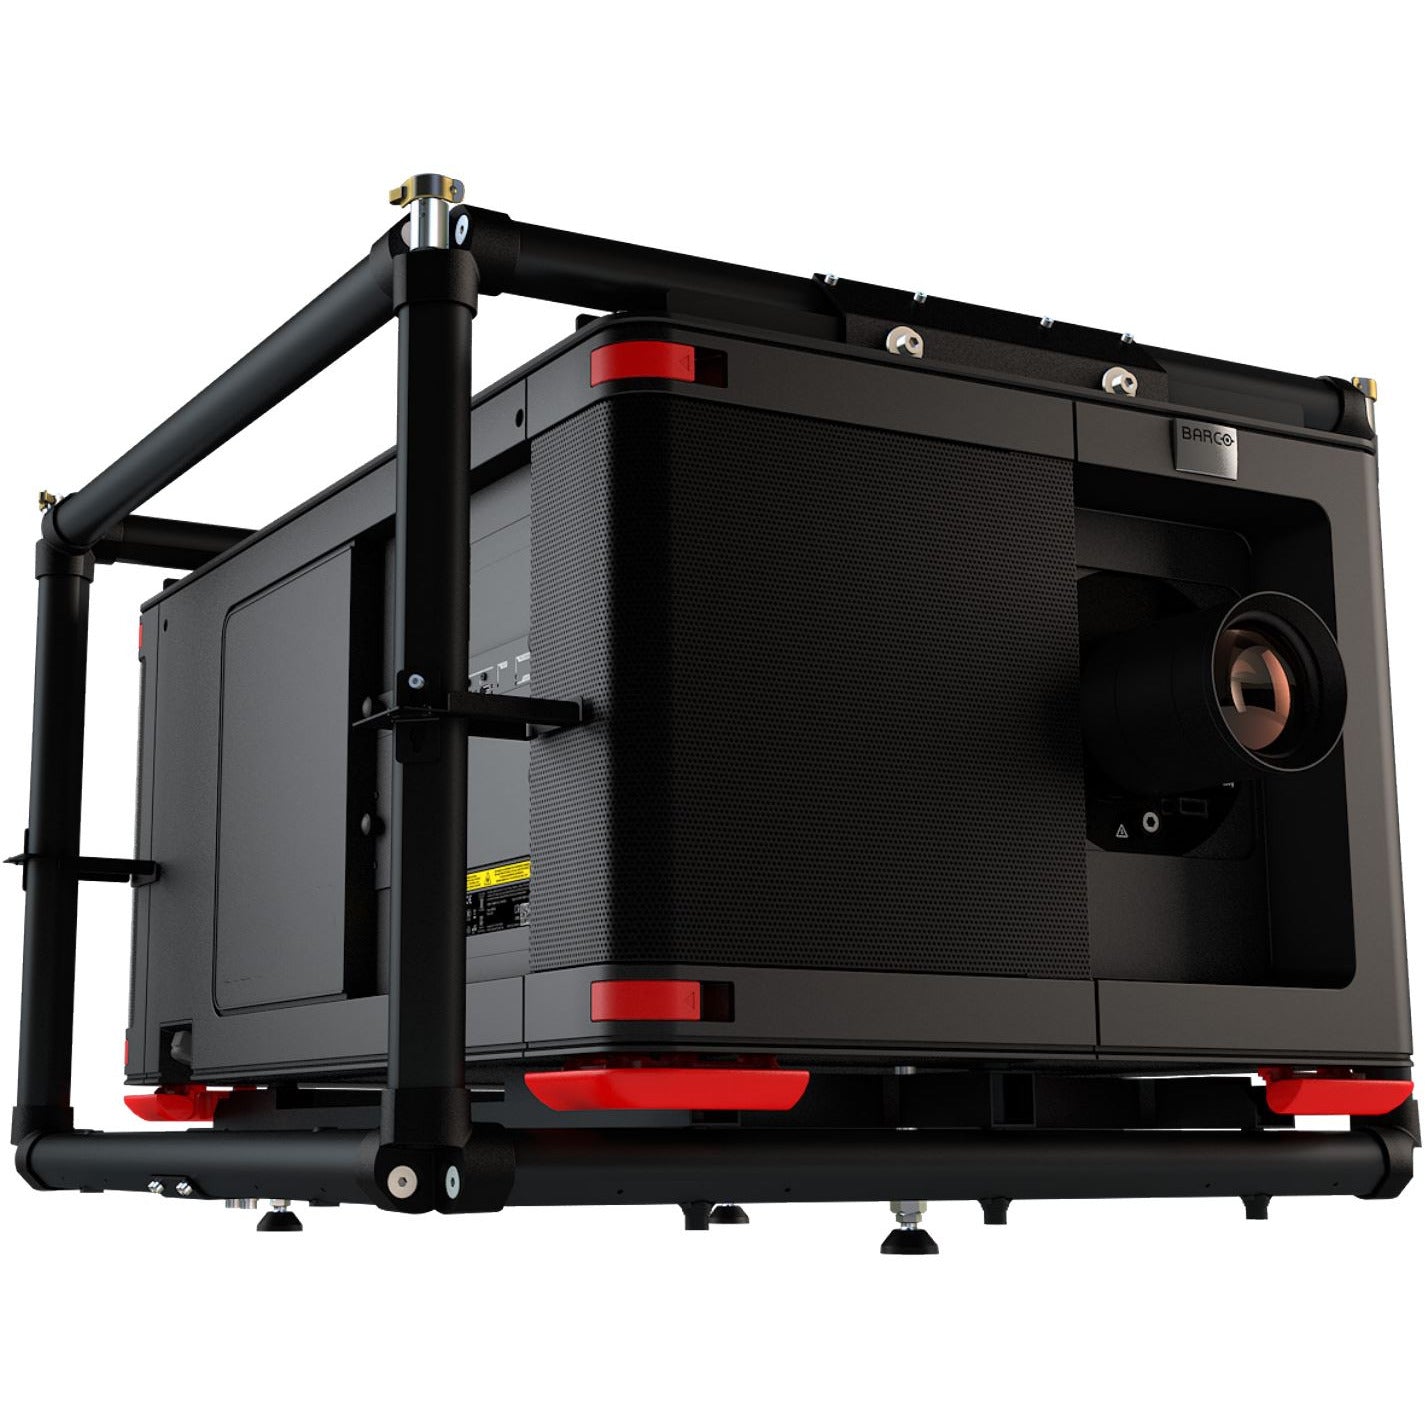 Barco Freya+ Architectural Edition Projector